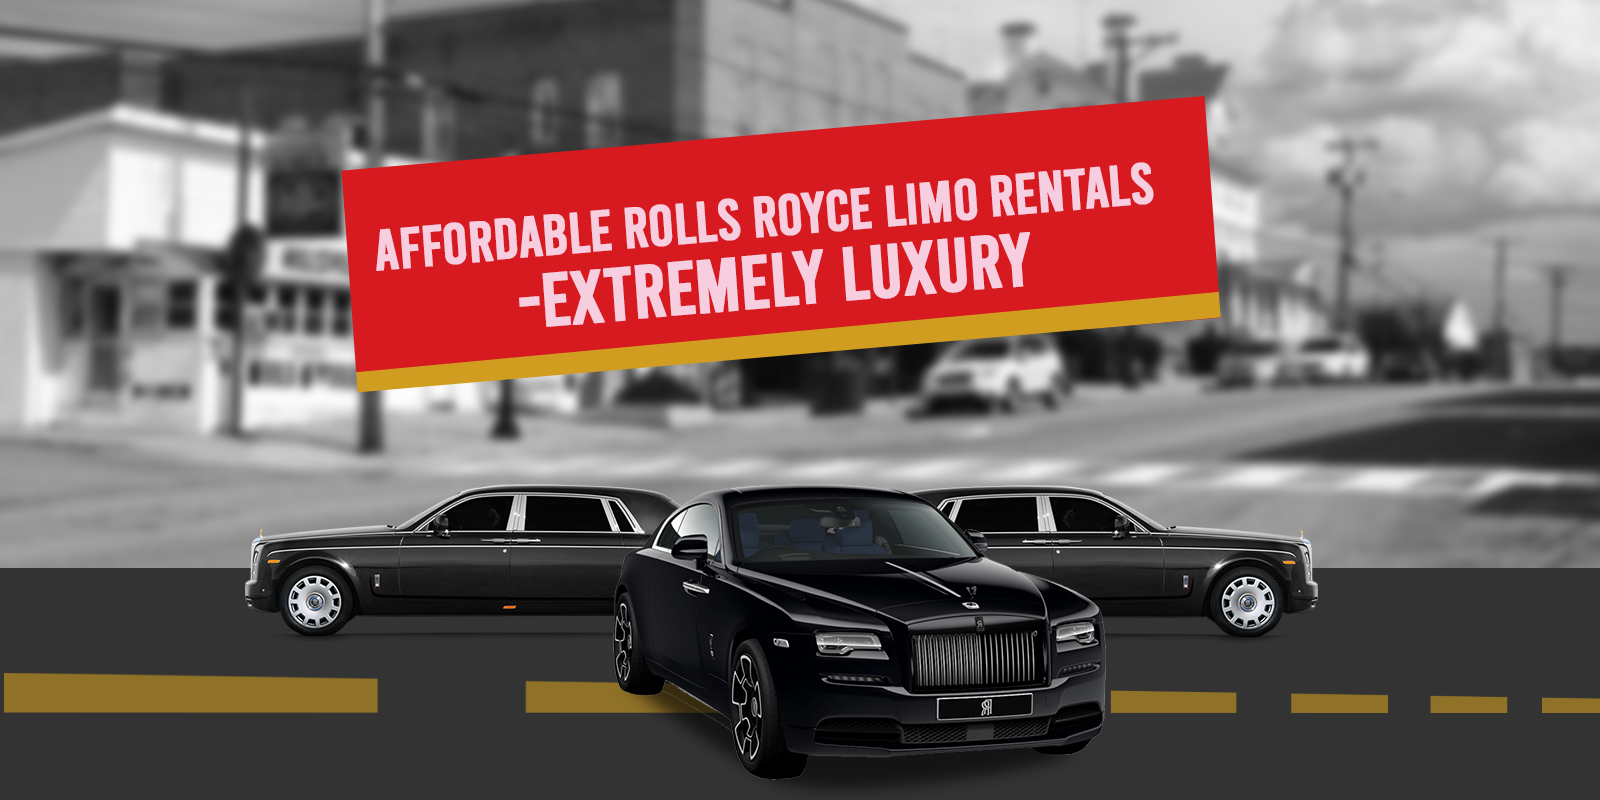 Affordable Rolls Royce Limo Rentals – Extremely Luxury